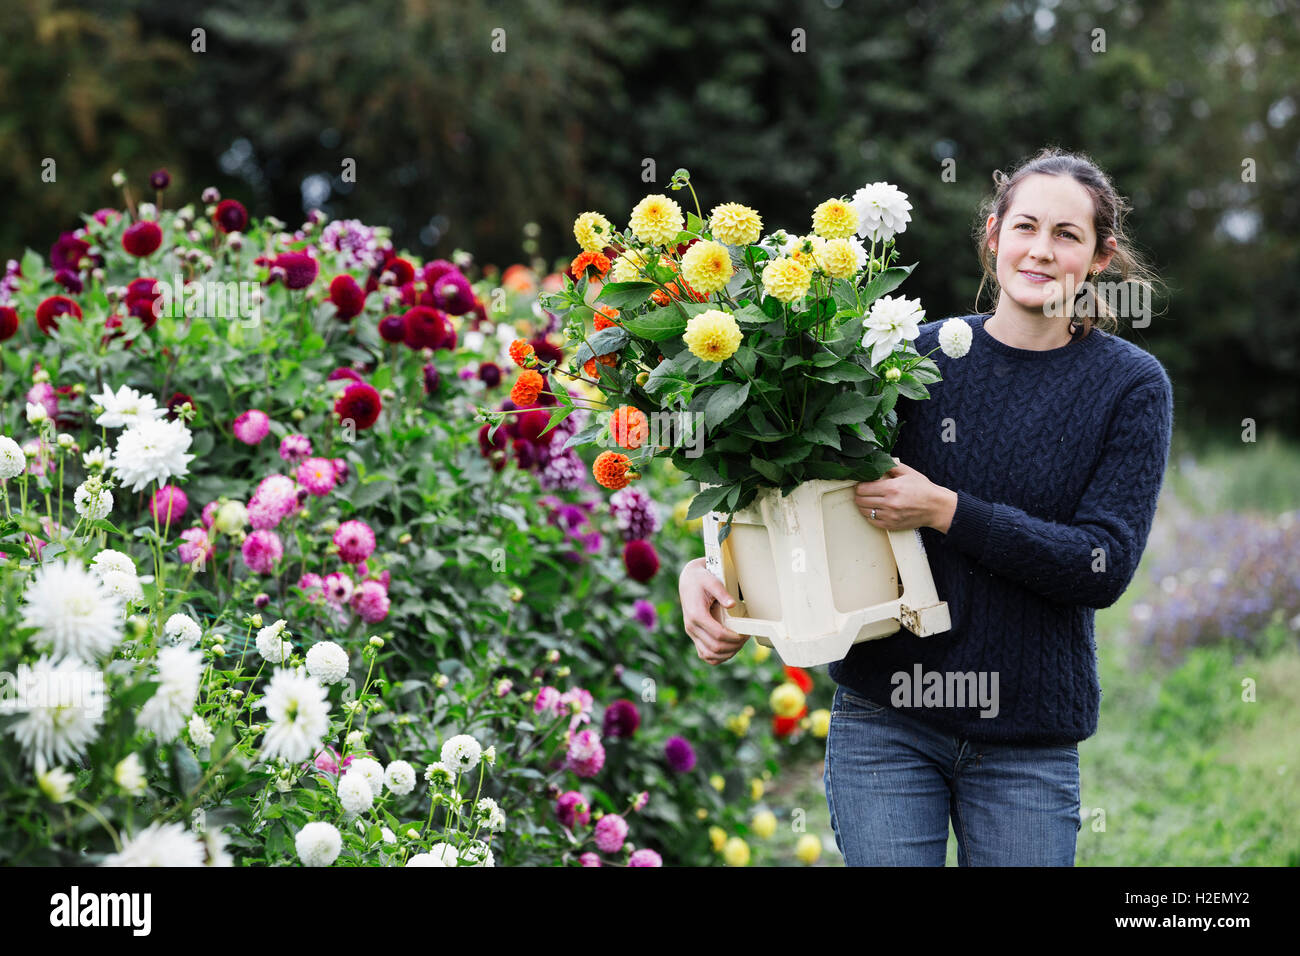 A woman working in an organic flower nursery, cutting flowers for flower arrangements and commercial orders. Stock Photo